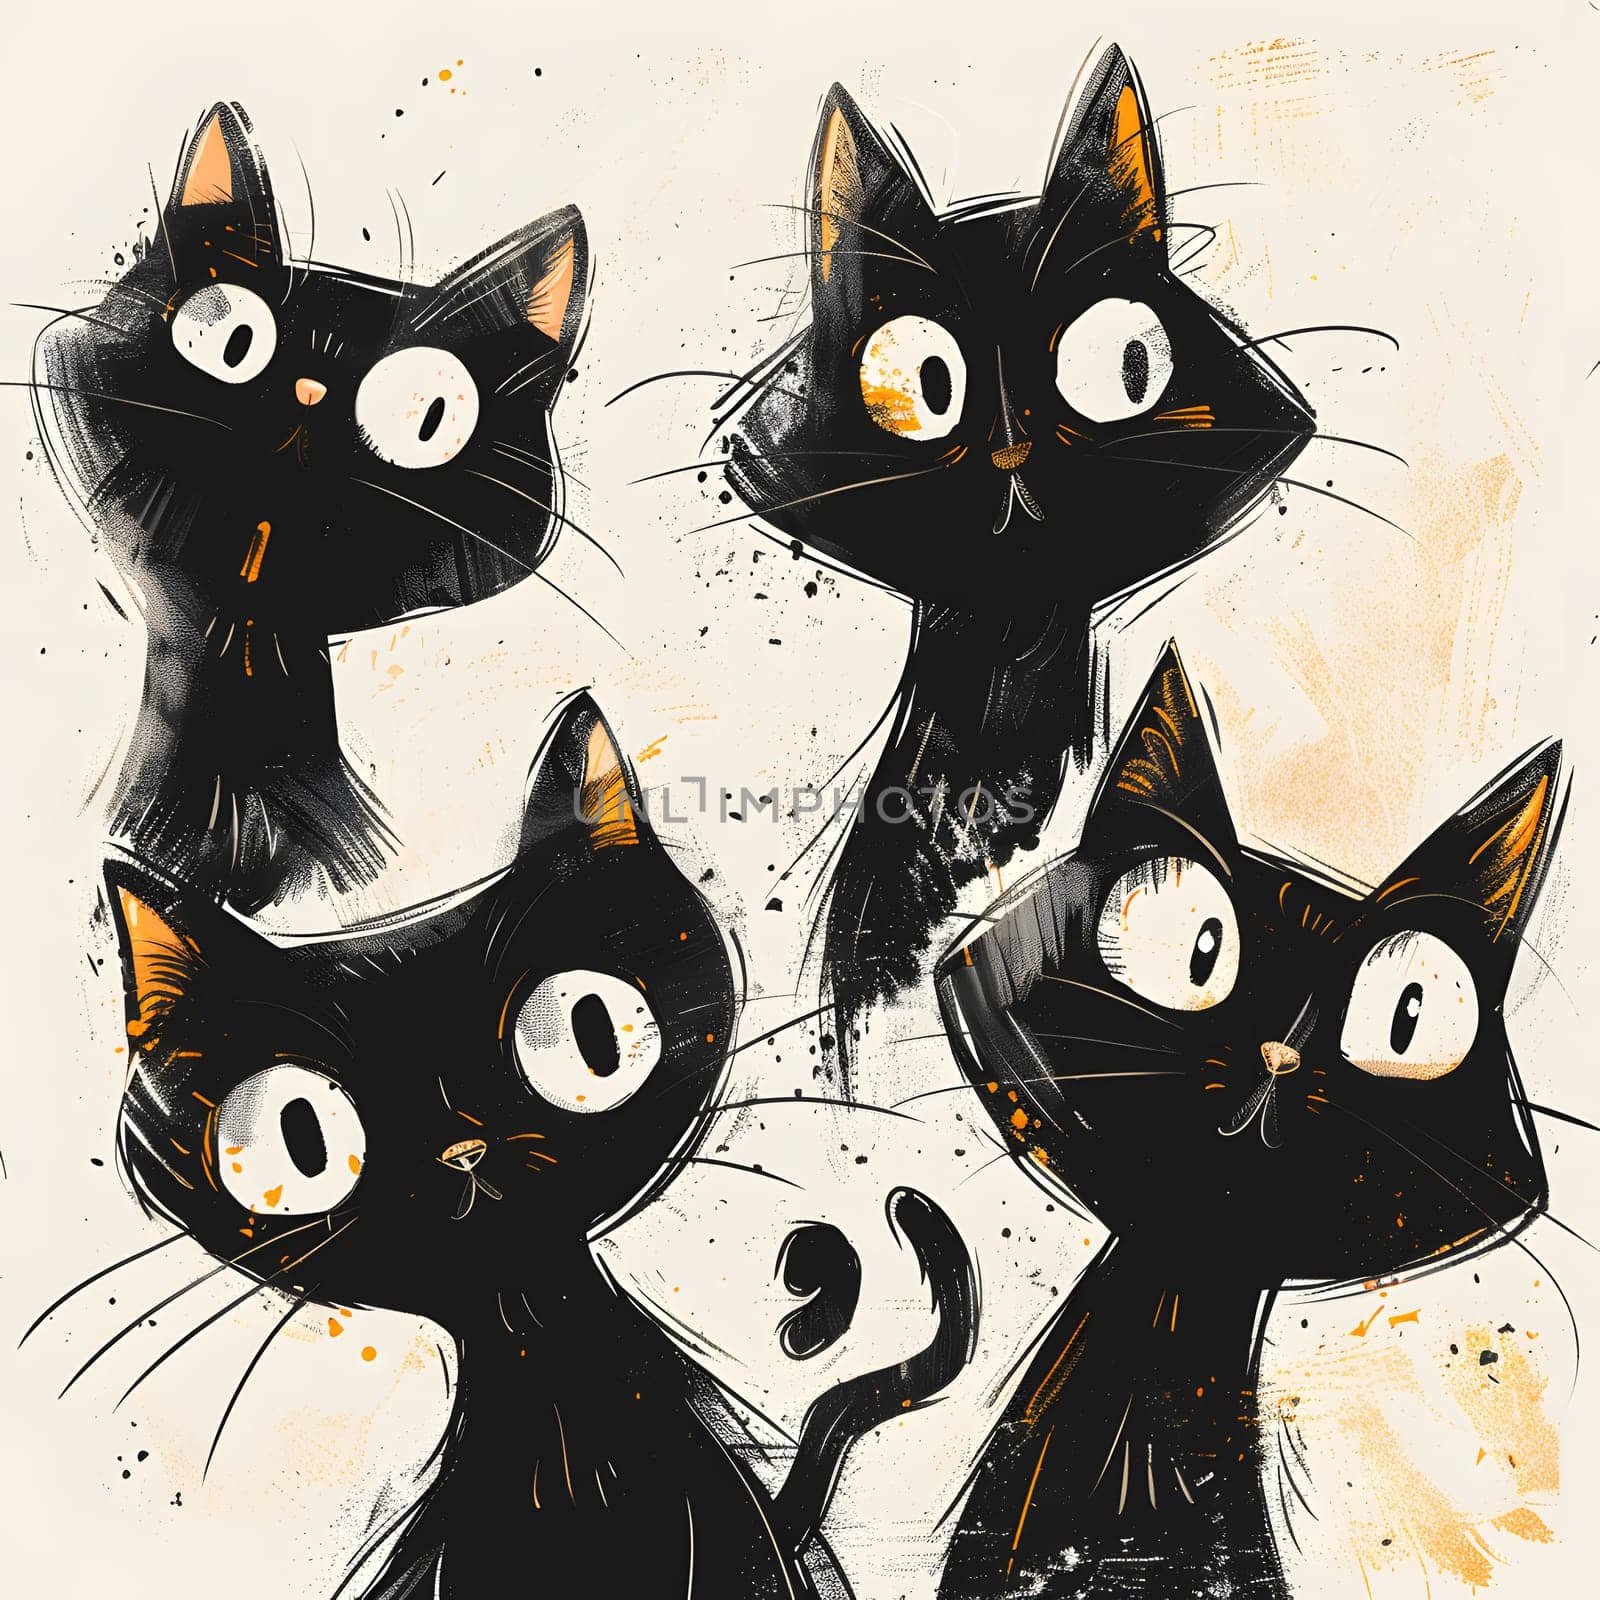 An art paint depicting four small to mediumsized cats from the Felidae family with black fur and striking white eyes, showcasing their whiskers and snouts